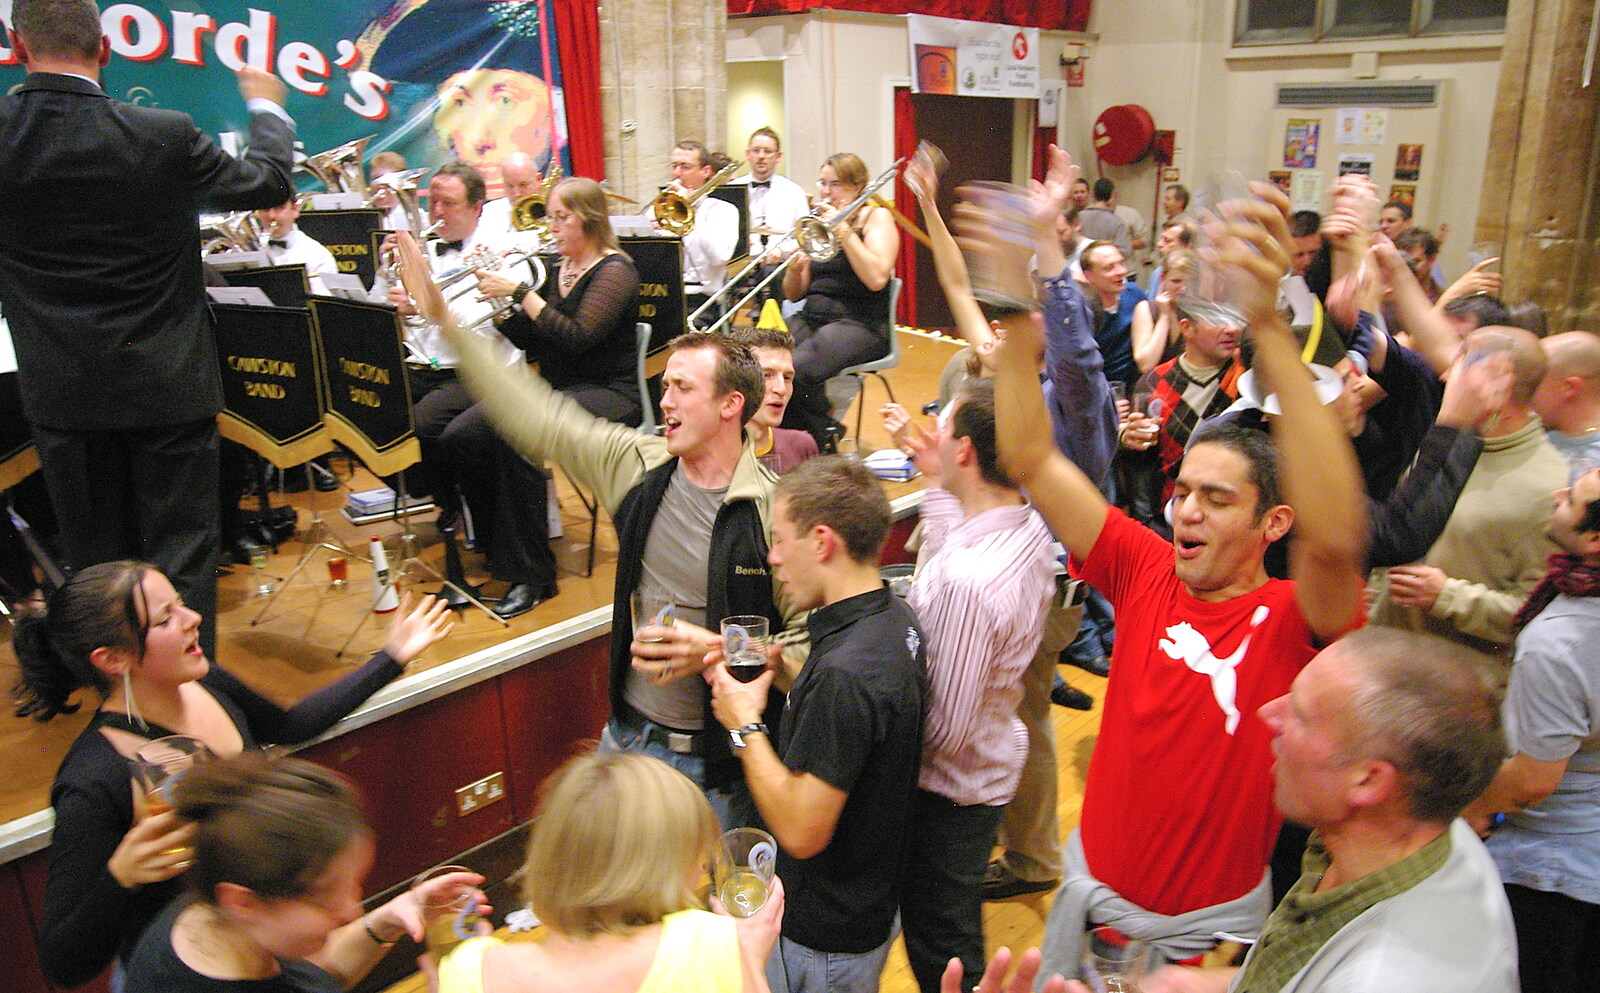 The 28th Norwich Beer Festival, St. Andrew's Hall, Norwich - 26th October 2005: There's a load of furious pint waving